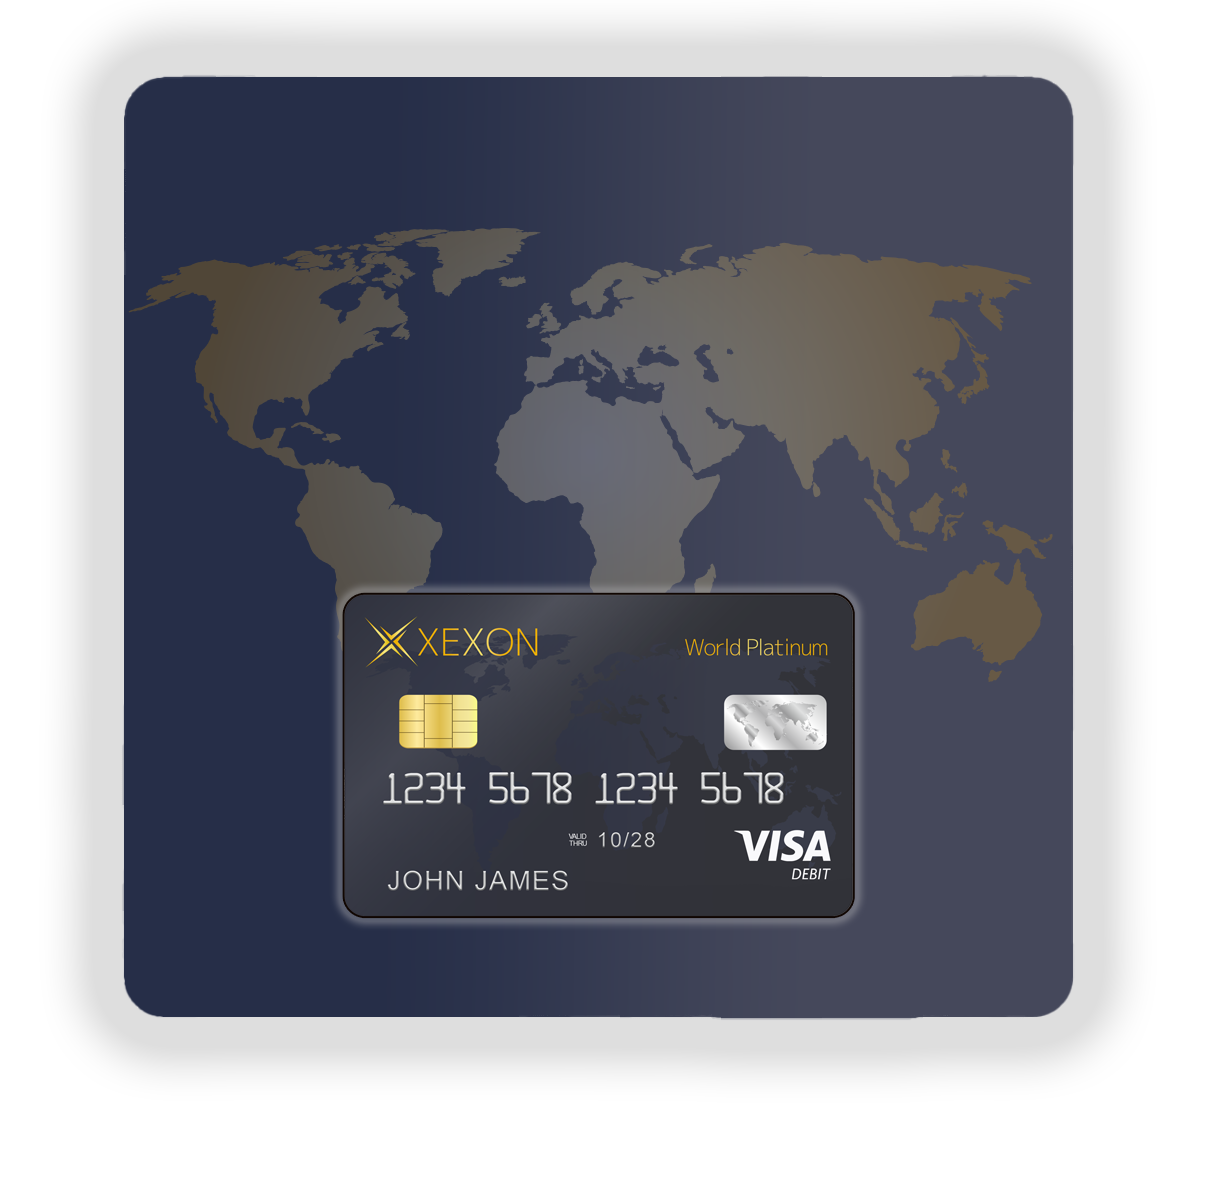 Crypto debit card that can be replenished with Bitcoin